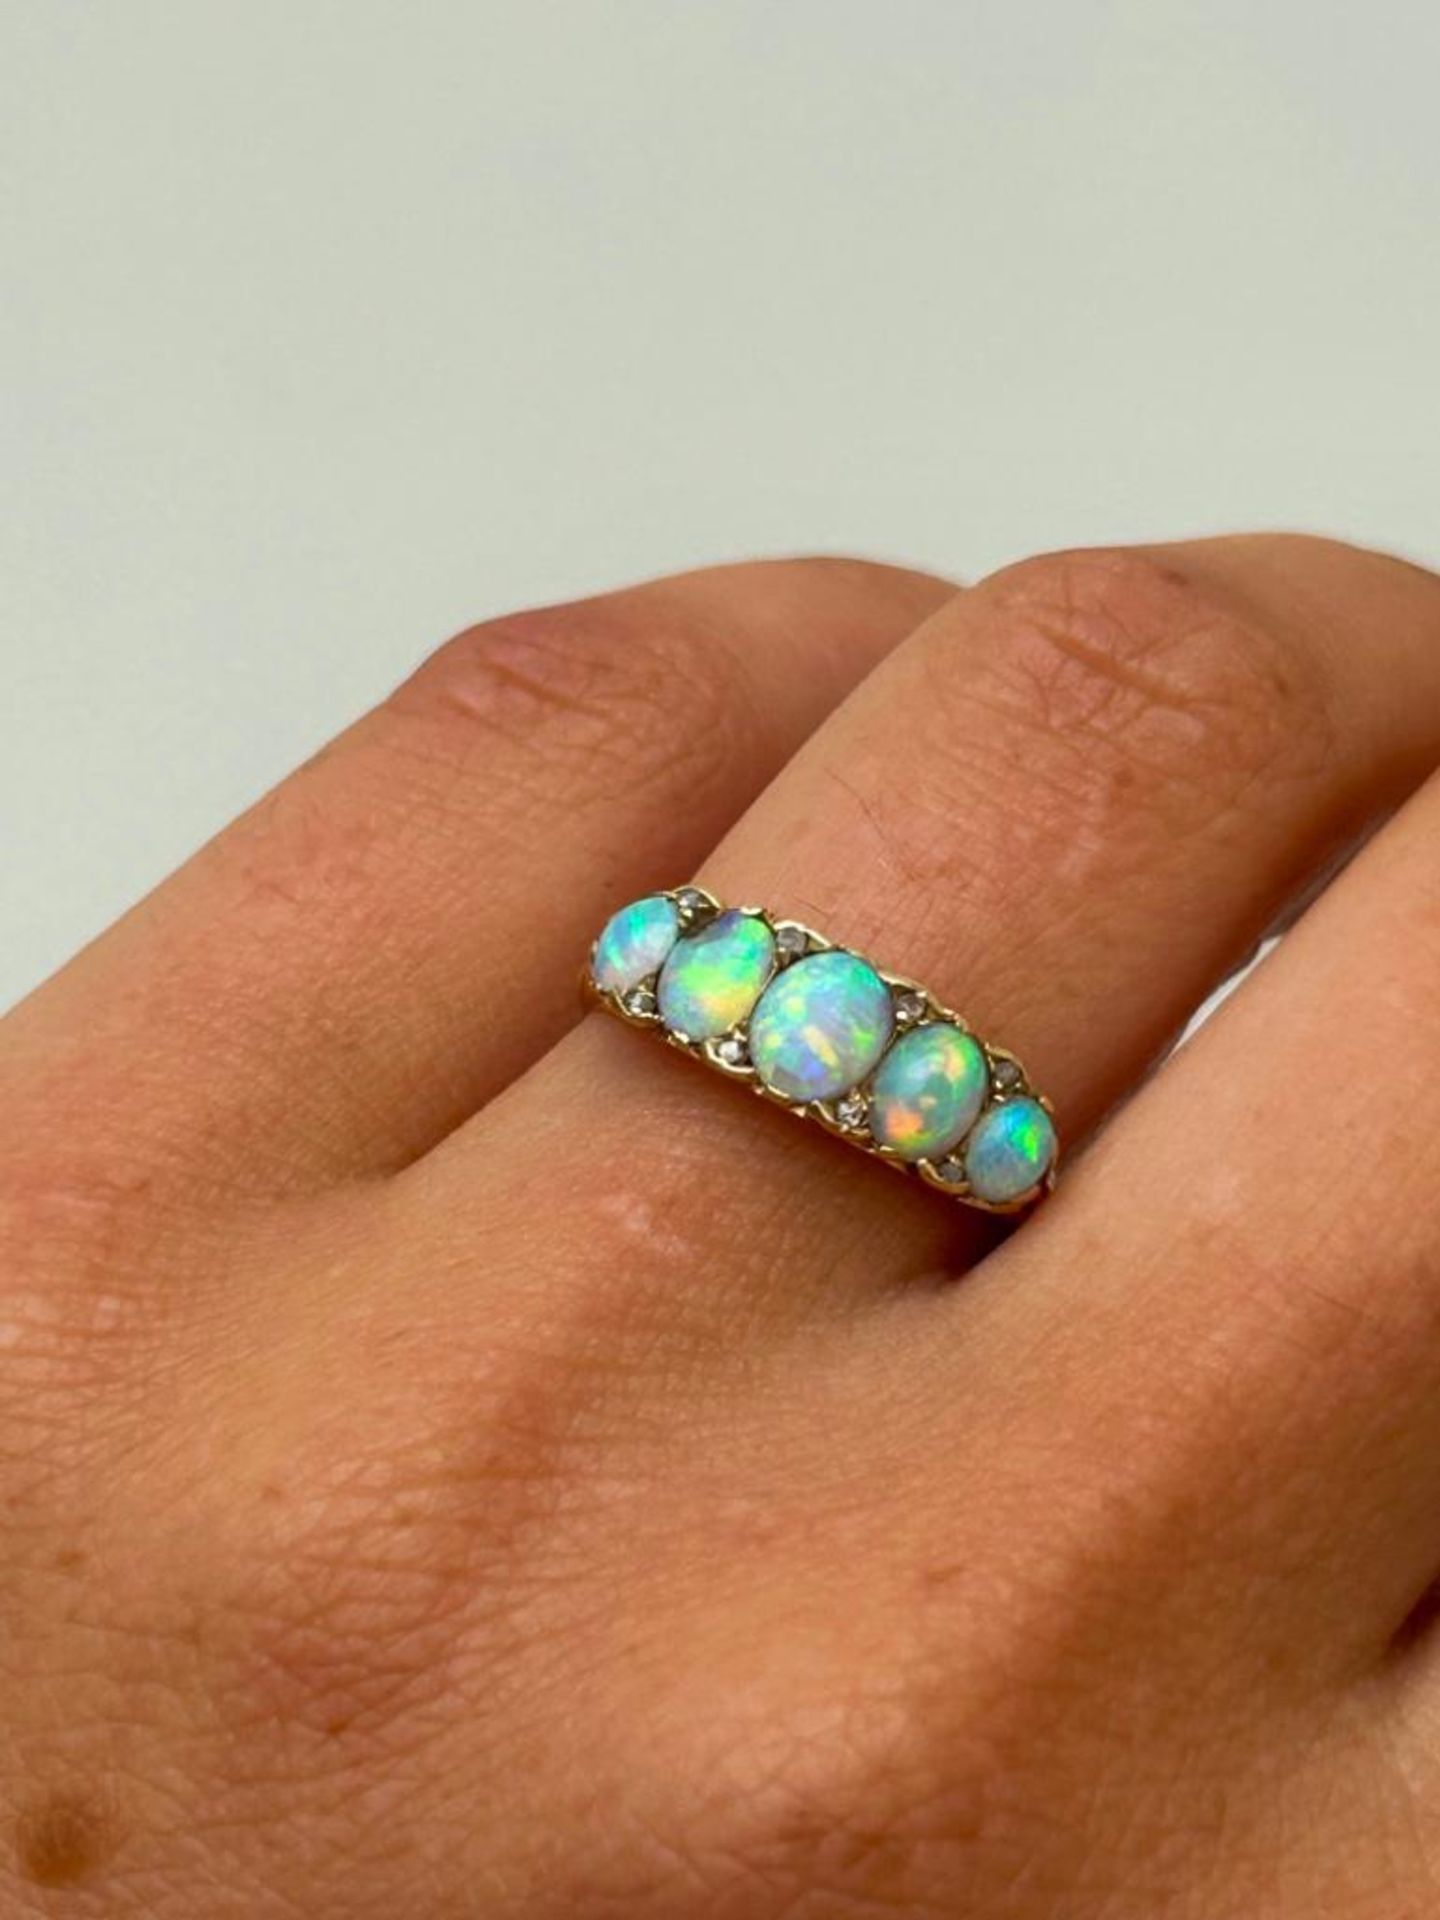 Antique 18ct Yellow Gold Scroll Gallery Opal and Diamond 5 Stone Ring - Image 2 of 6